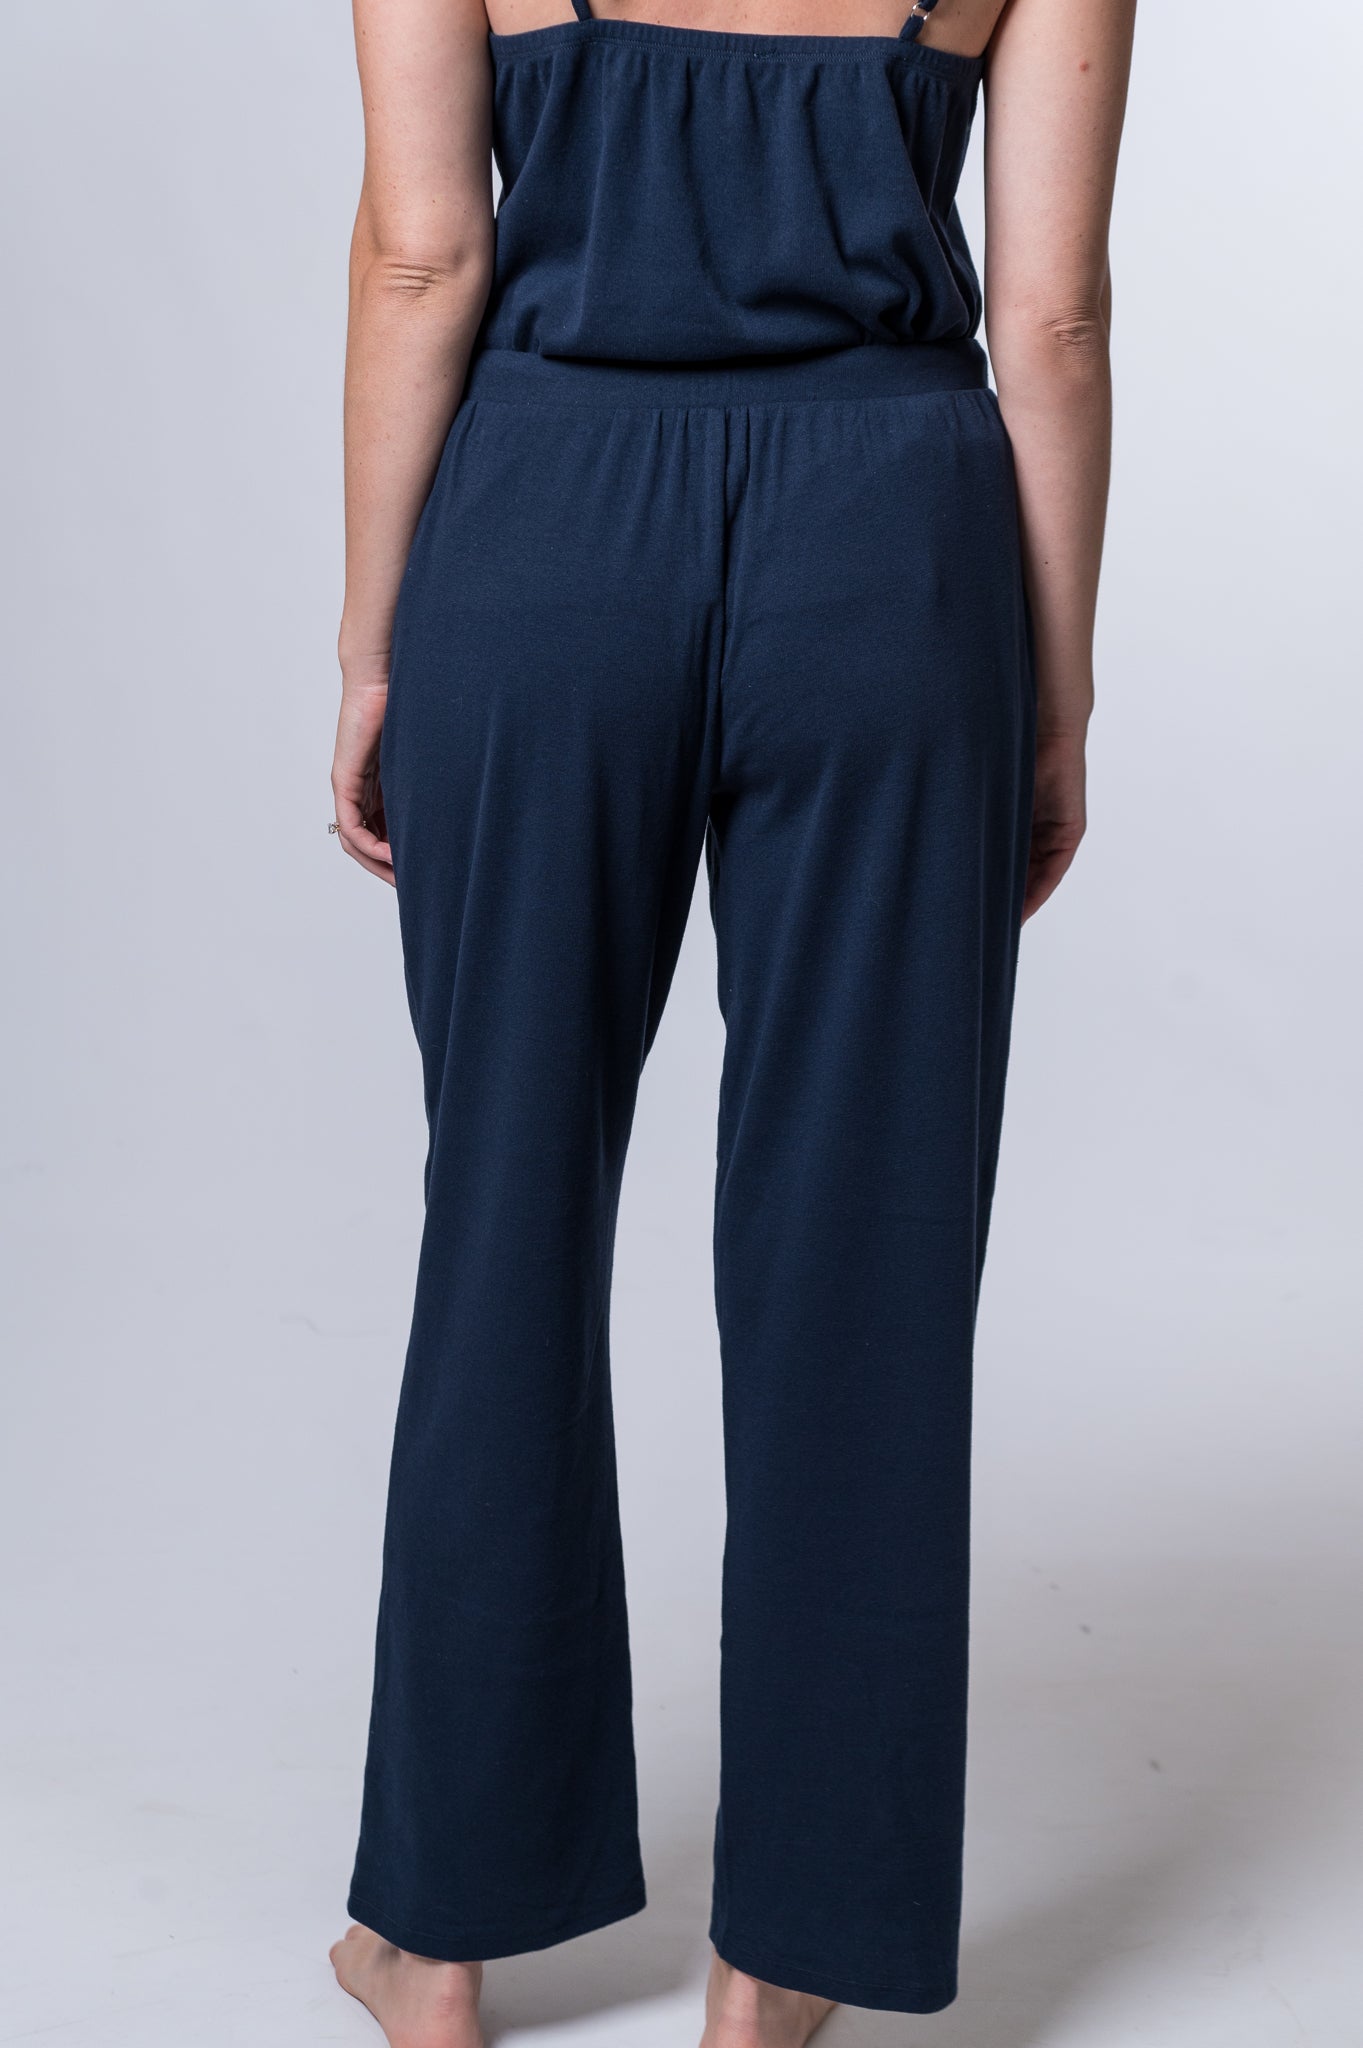 Load image into Gallery viewer, Woman wearing navy blue drawstring lounge pant and matching tank top. Back of clothing is being shown
